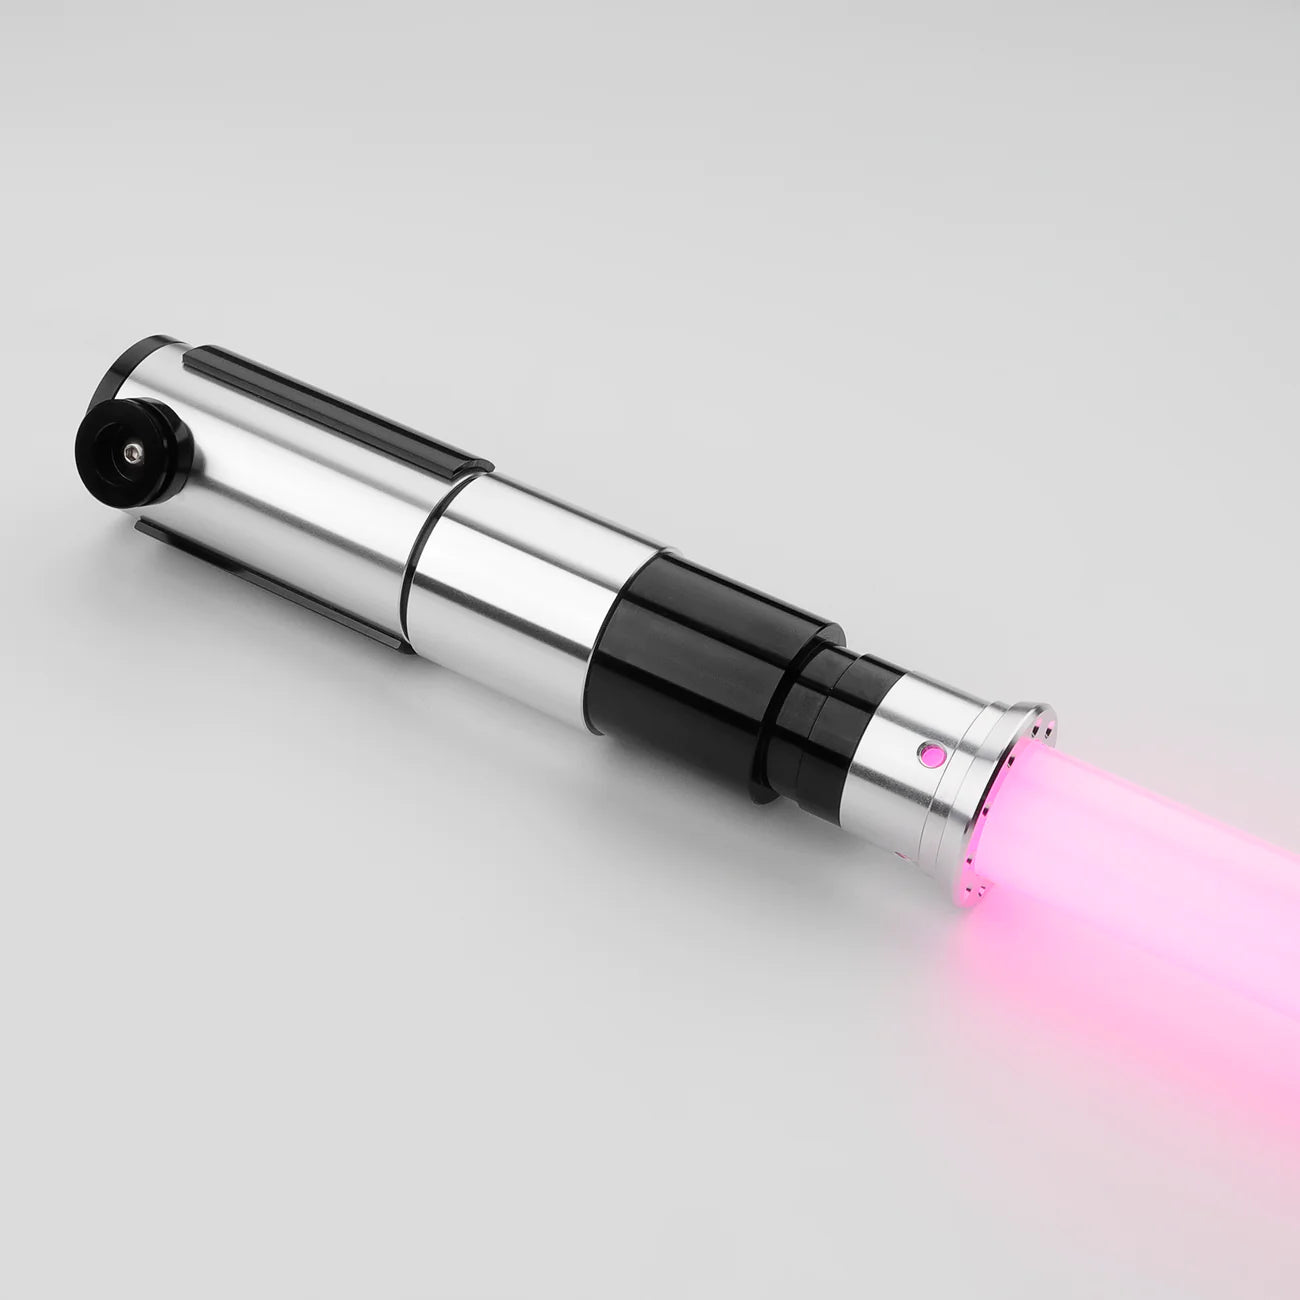 THE PIELL PROTECTOR LIGHTSABER